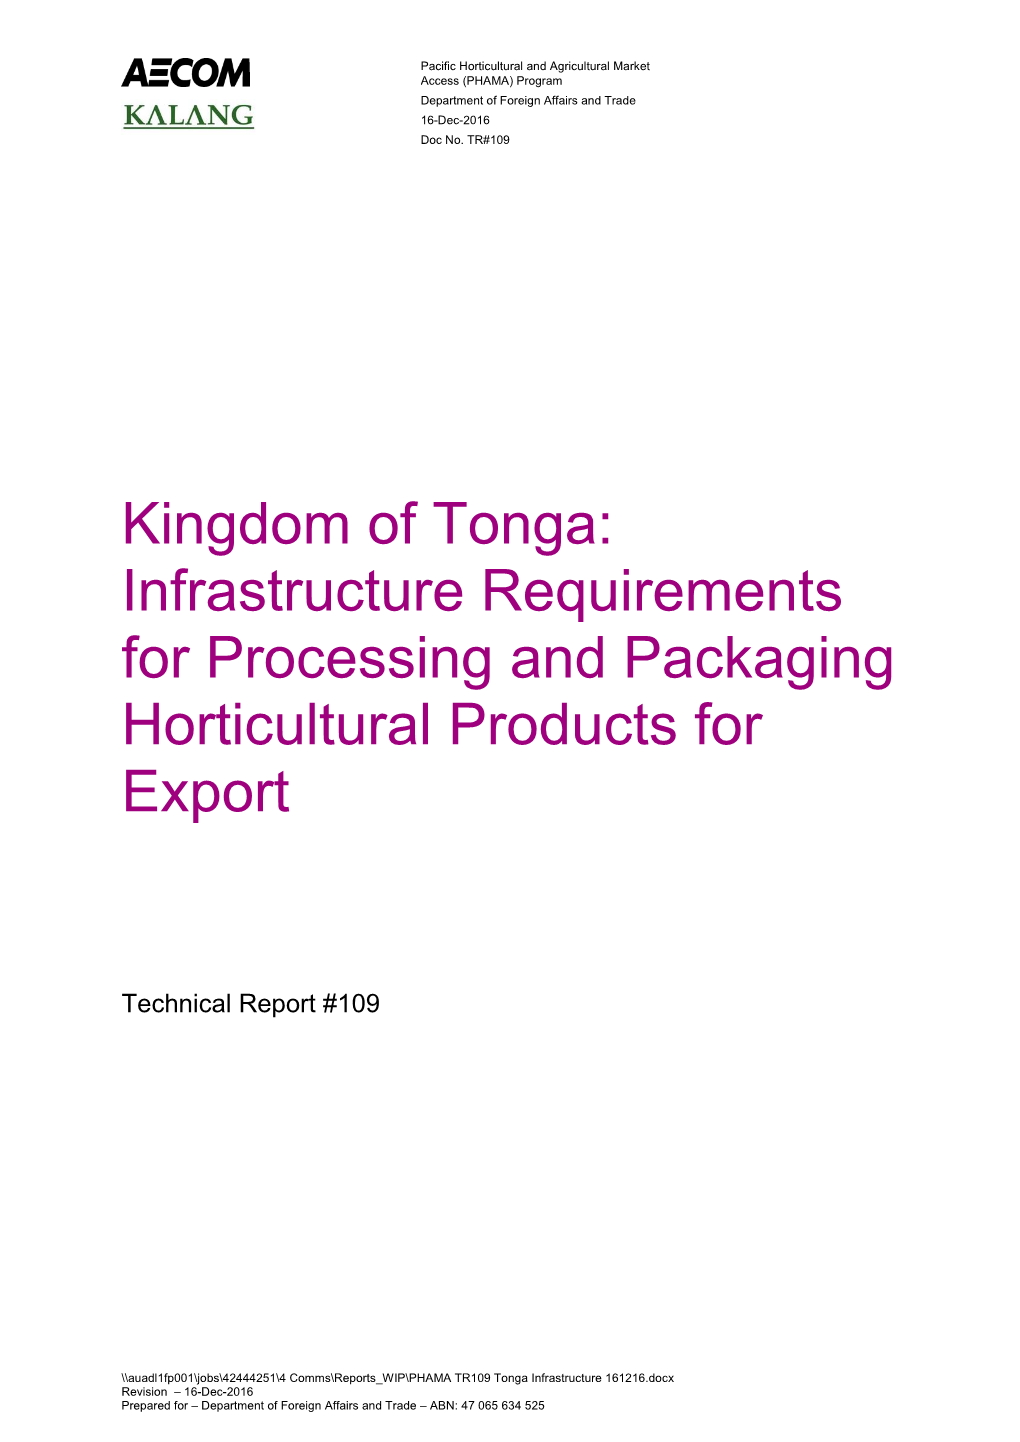 Kingdom of Tonga: Infrastructure Requirements for Processing and Packaging Horticultural Products for Export